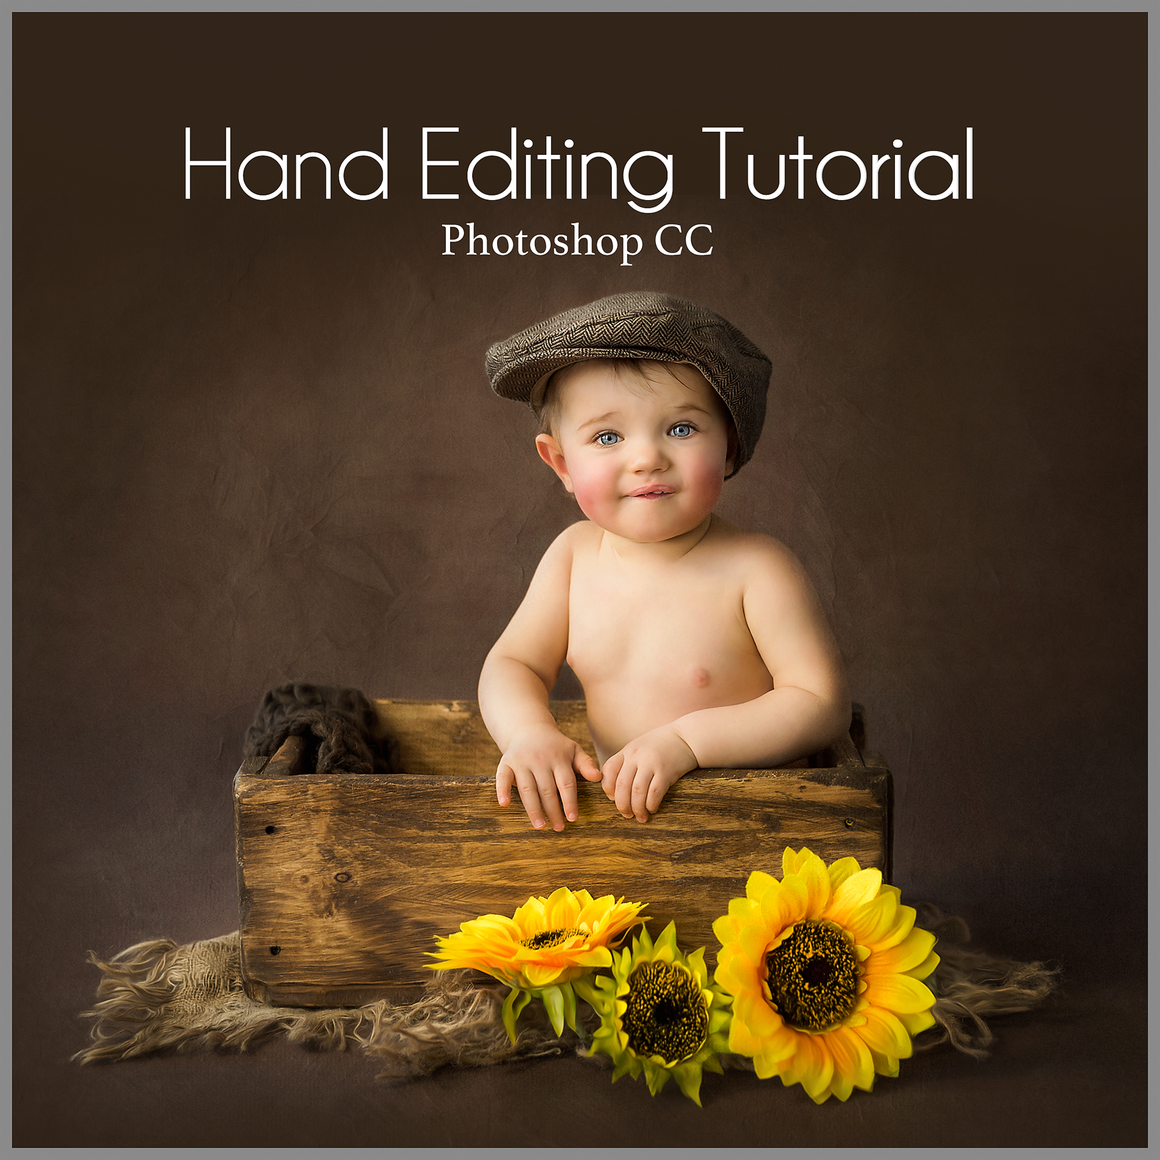 Photoshop Actions And Editing Tutorials